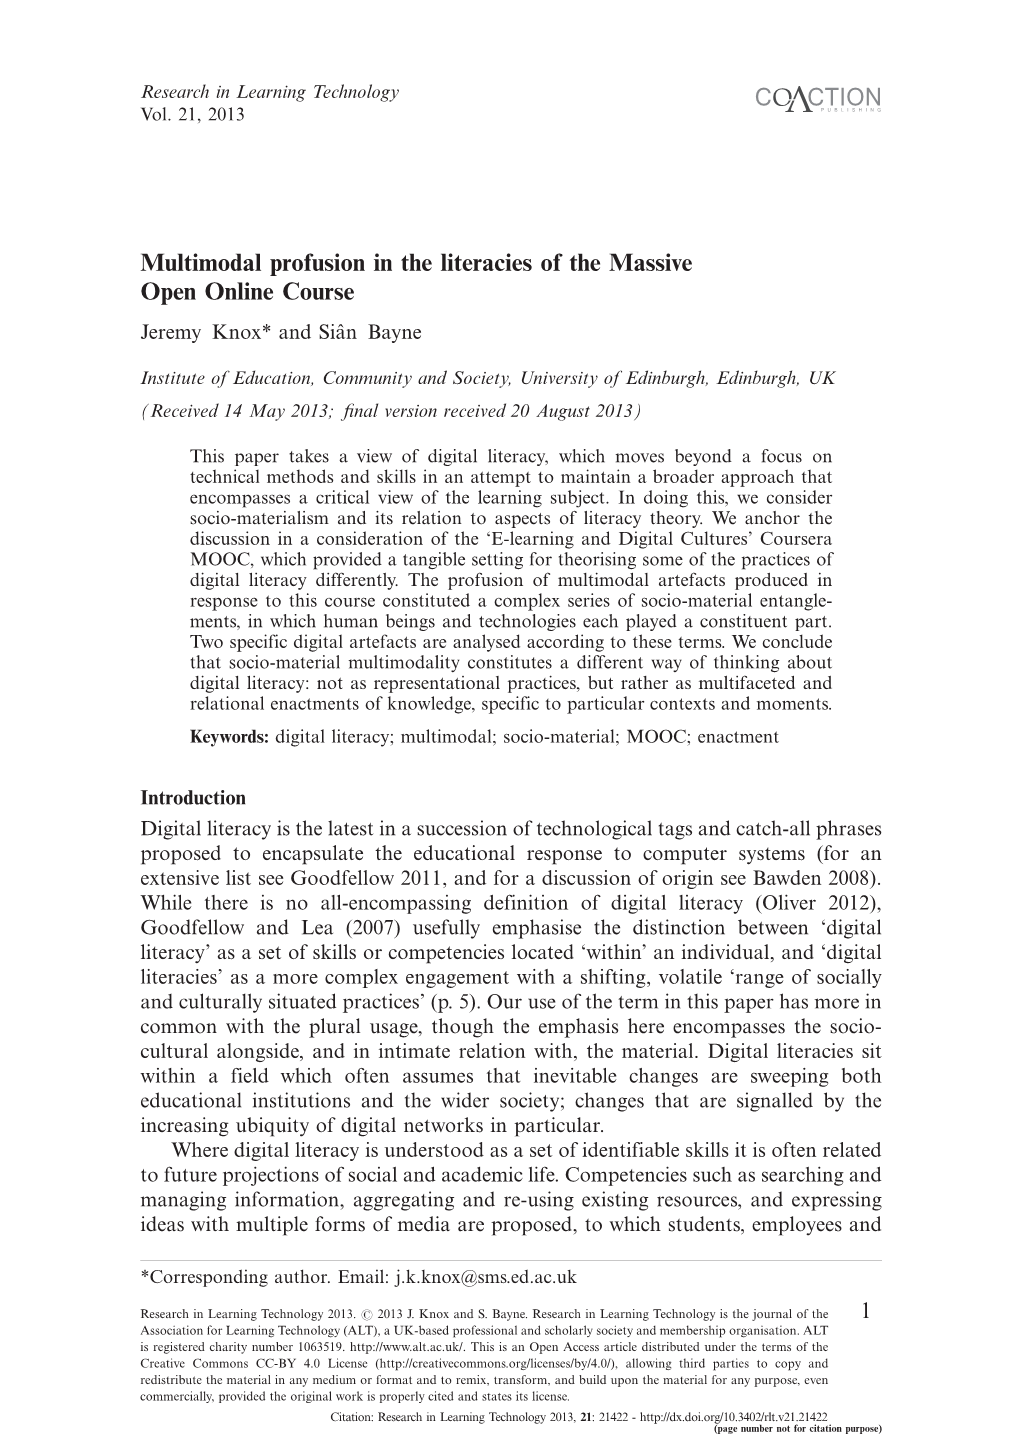 Multimodal Profusion in the Literacies of the Massive Open Online Course Jeremy Knox* and Siaˆn Bayne